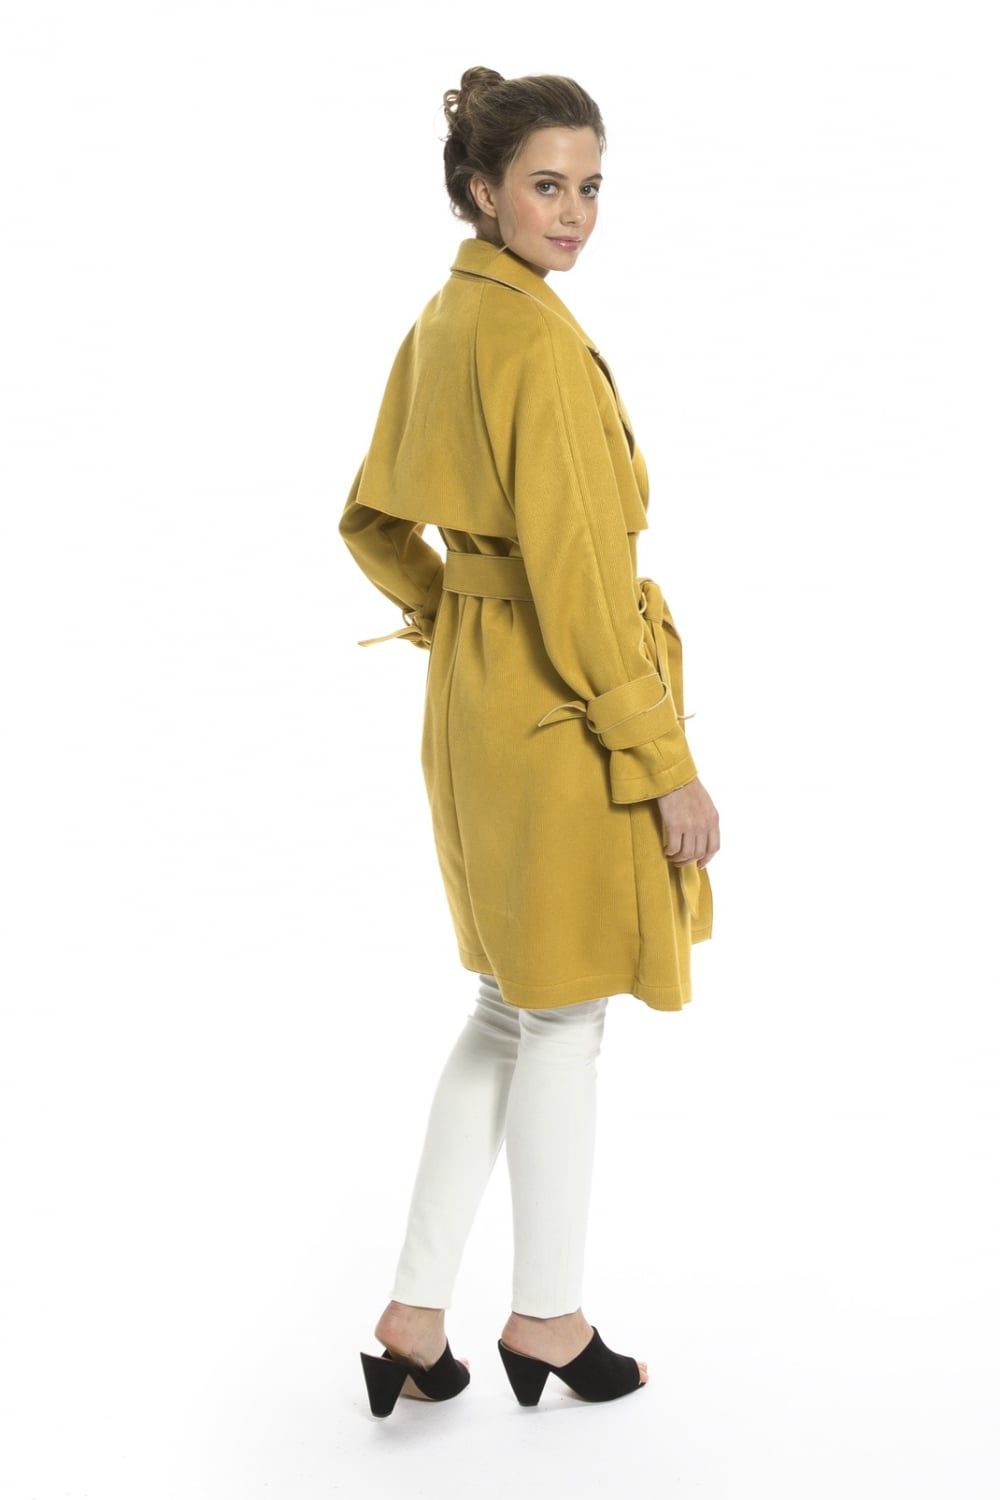 Comfortably fits sizes 6 - 14
A must-have for your wardrobe, our mustard yellow trench coat is sophisticated and stylish. Designed from Jayley's classic trench collection. Our trench coat had featured pockets, a tie waist, and a storm flap.